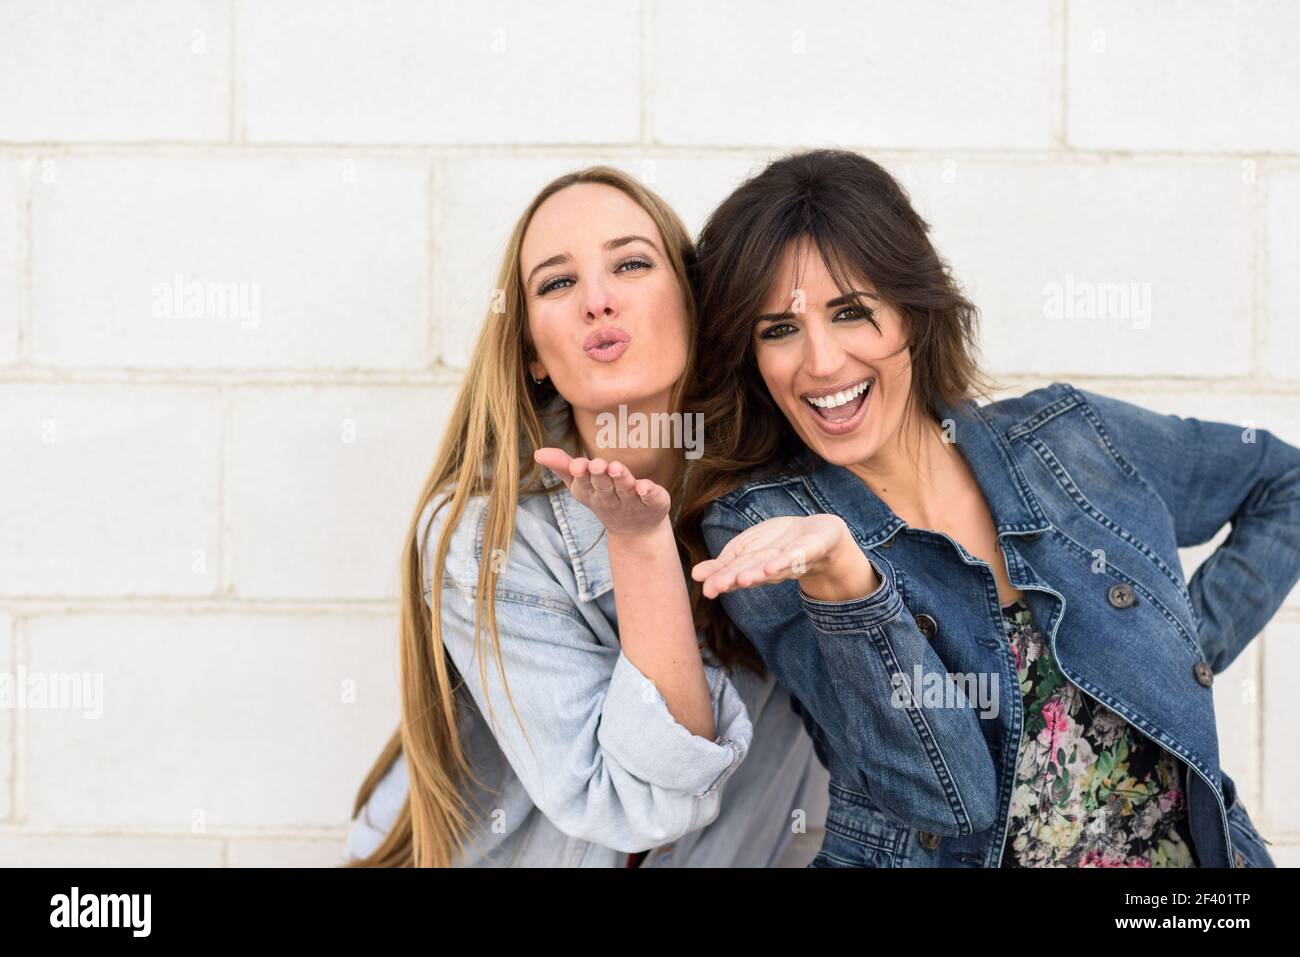 Two young women blowing a kiss on urban wall.. Two young women blowing a kiss on urban wall outdoors. Stock Photo